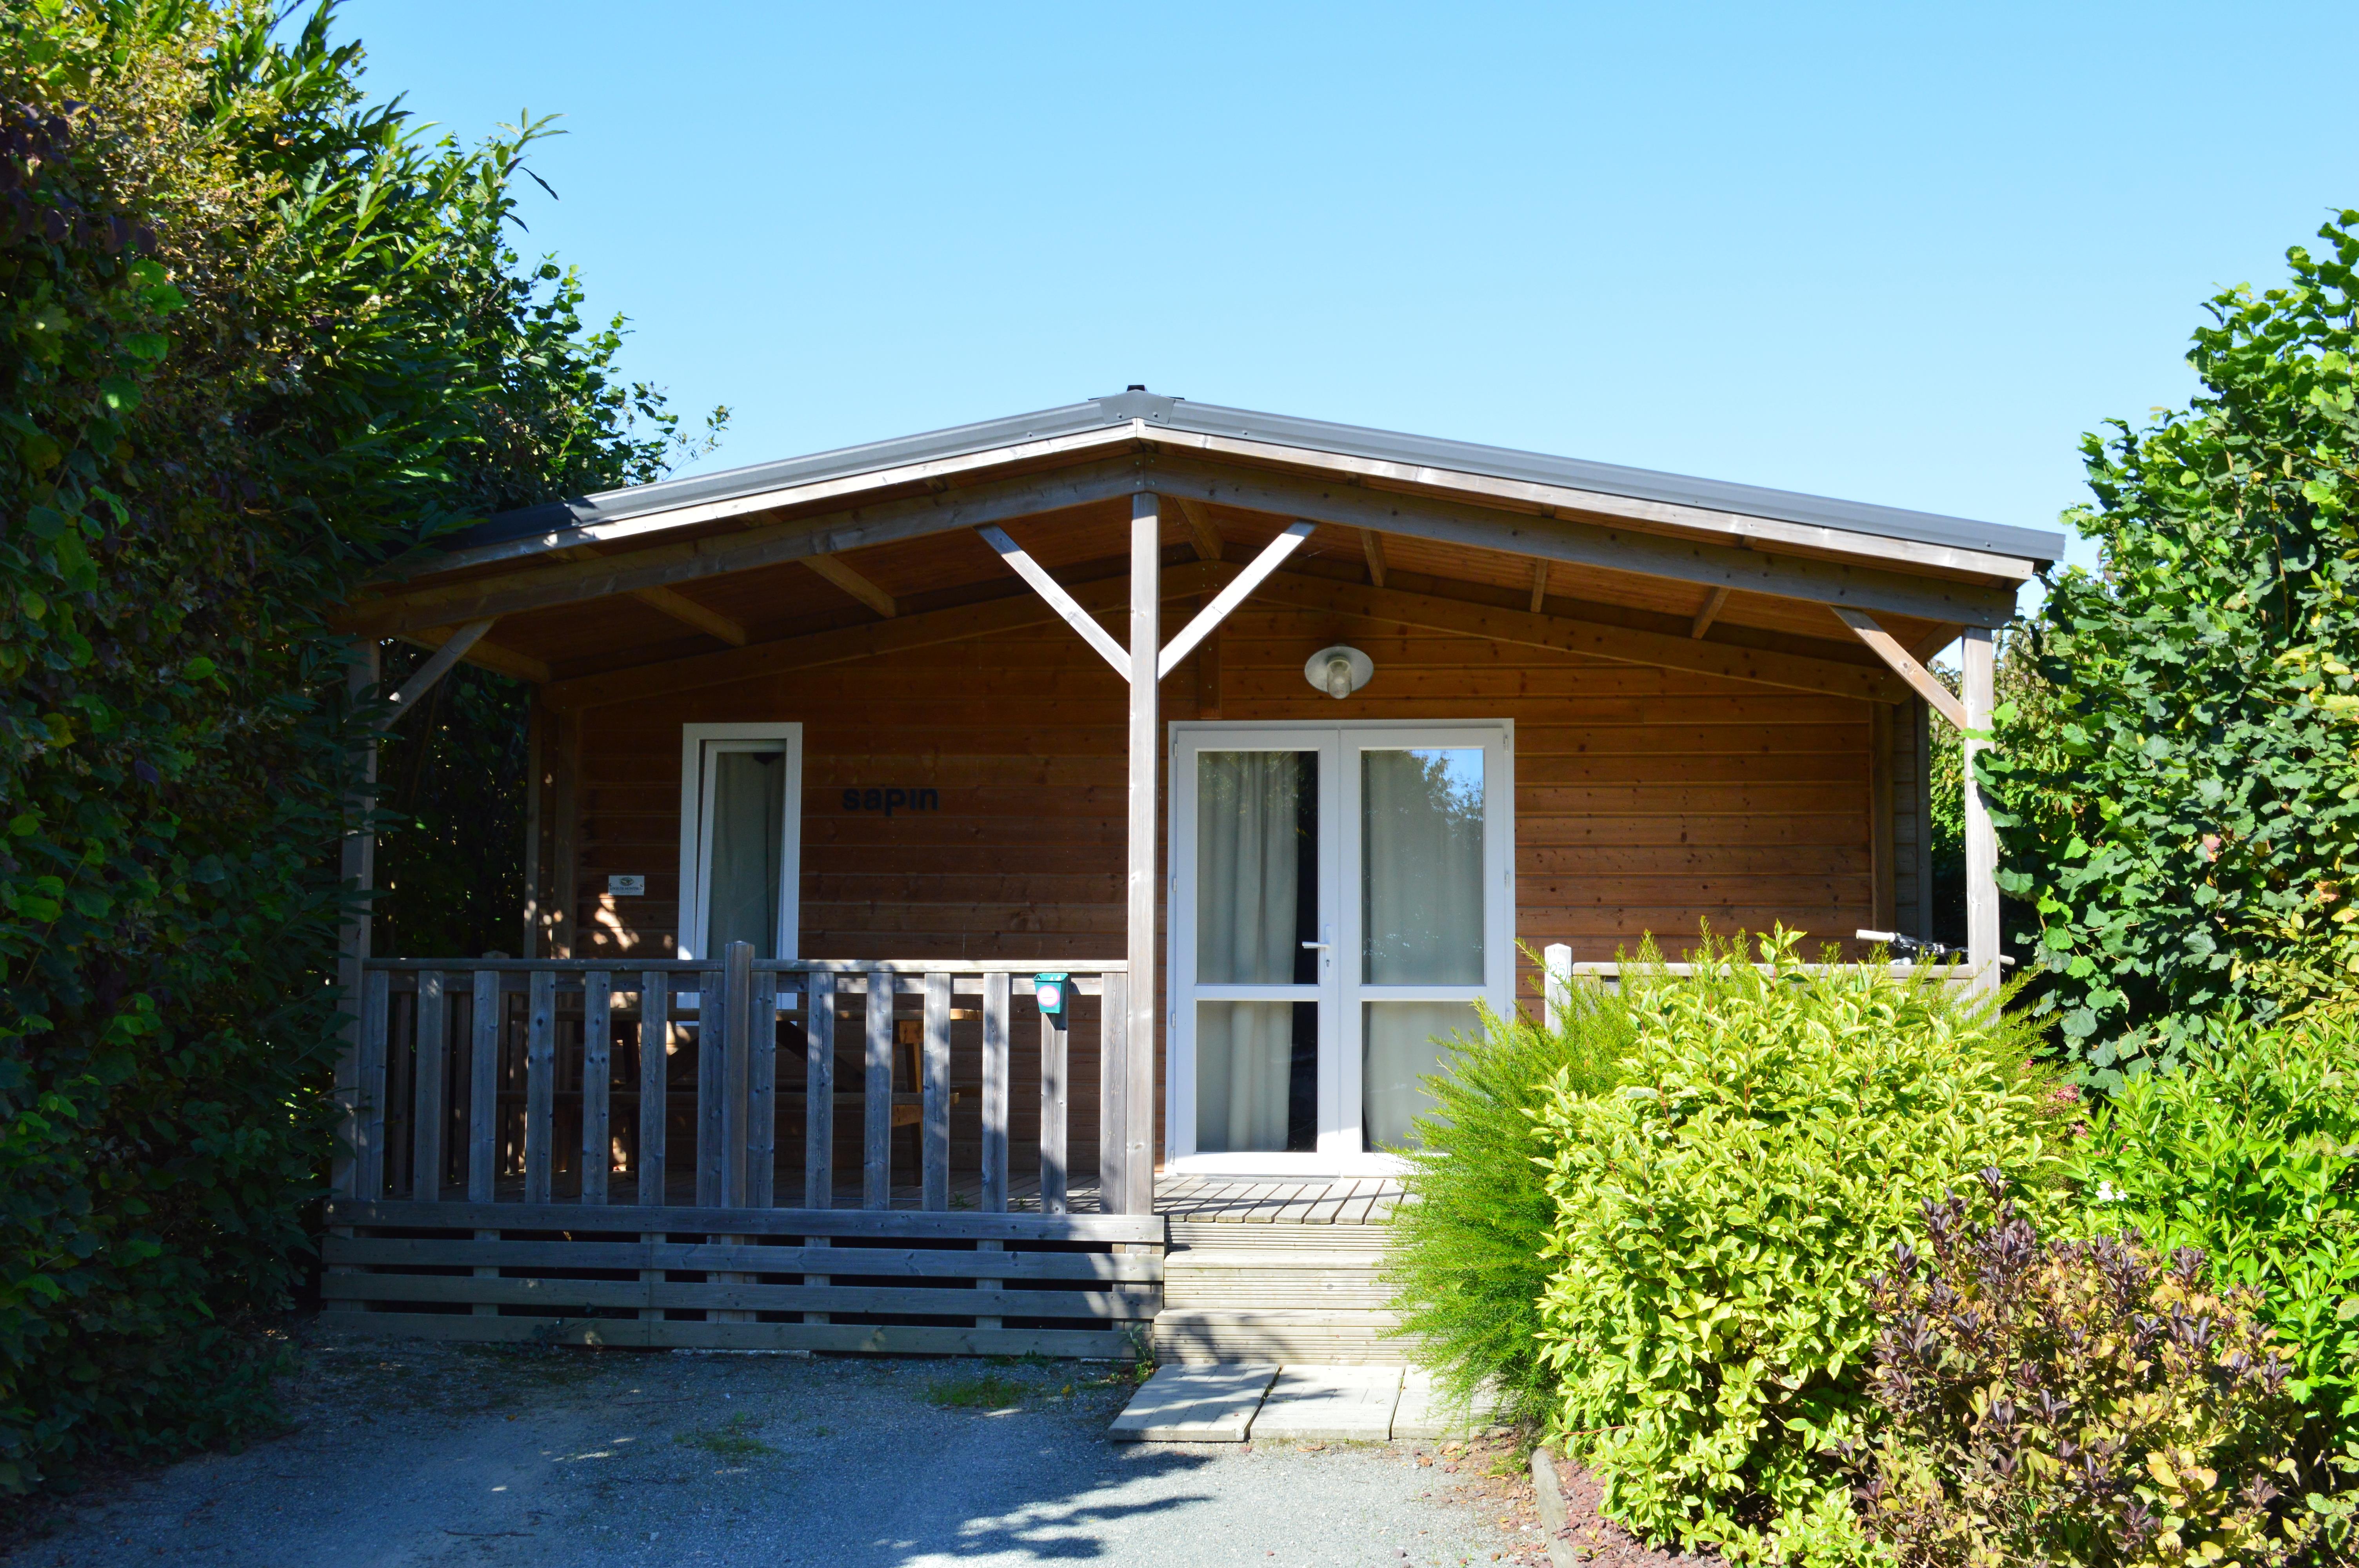 Accommodation - Chalet Sapin Premium 2 Bedrooms + Sheltered Terrace - Camping L'Ambois